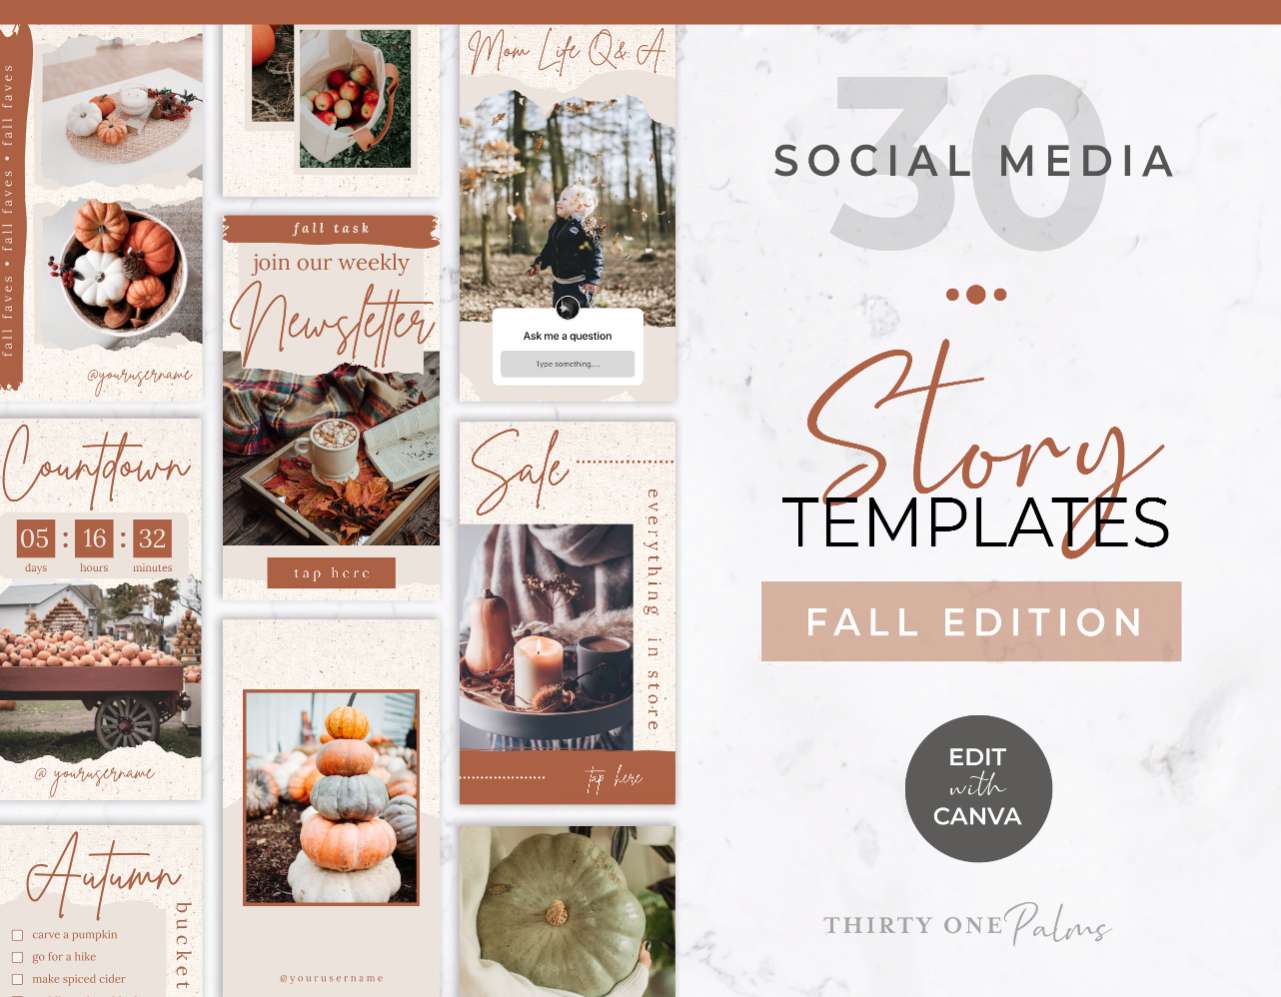 Instagram Story Templates for Canva – Fall Edition